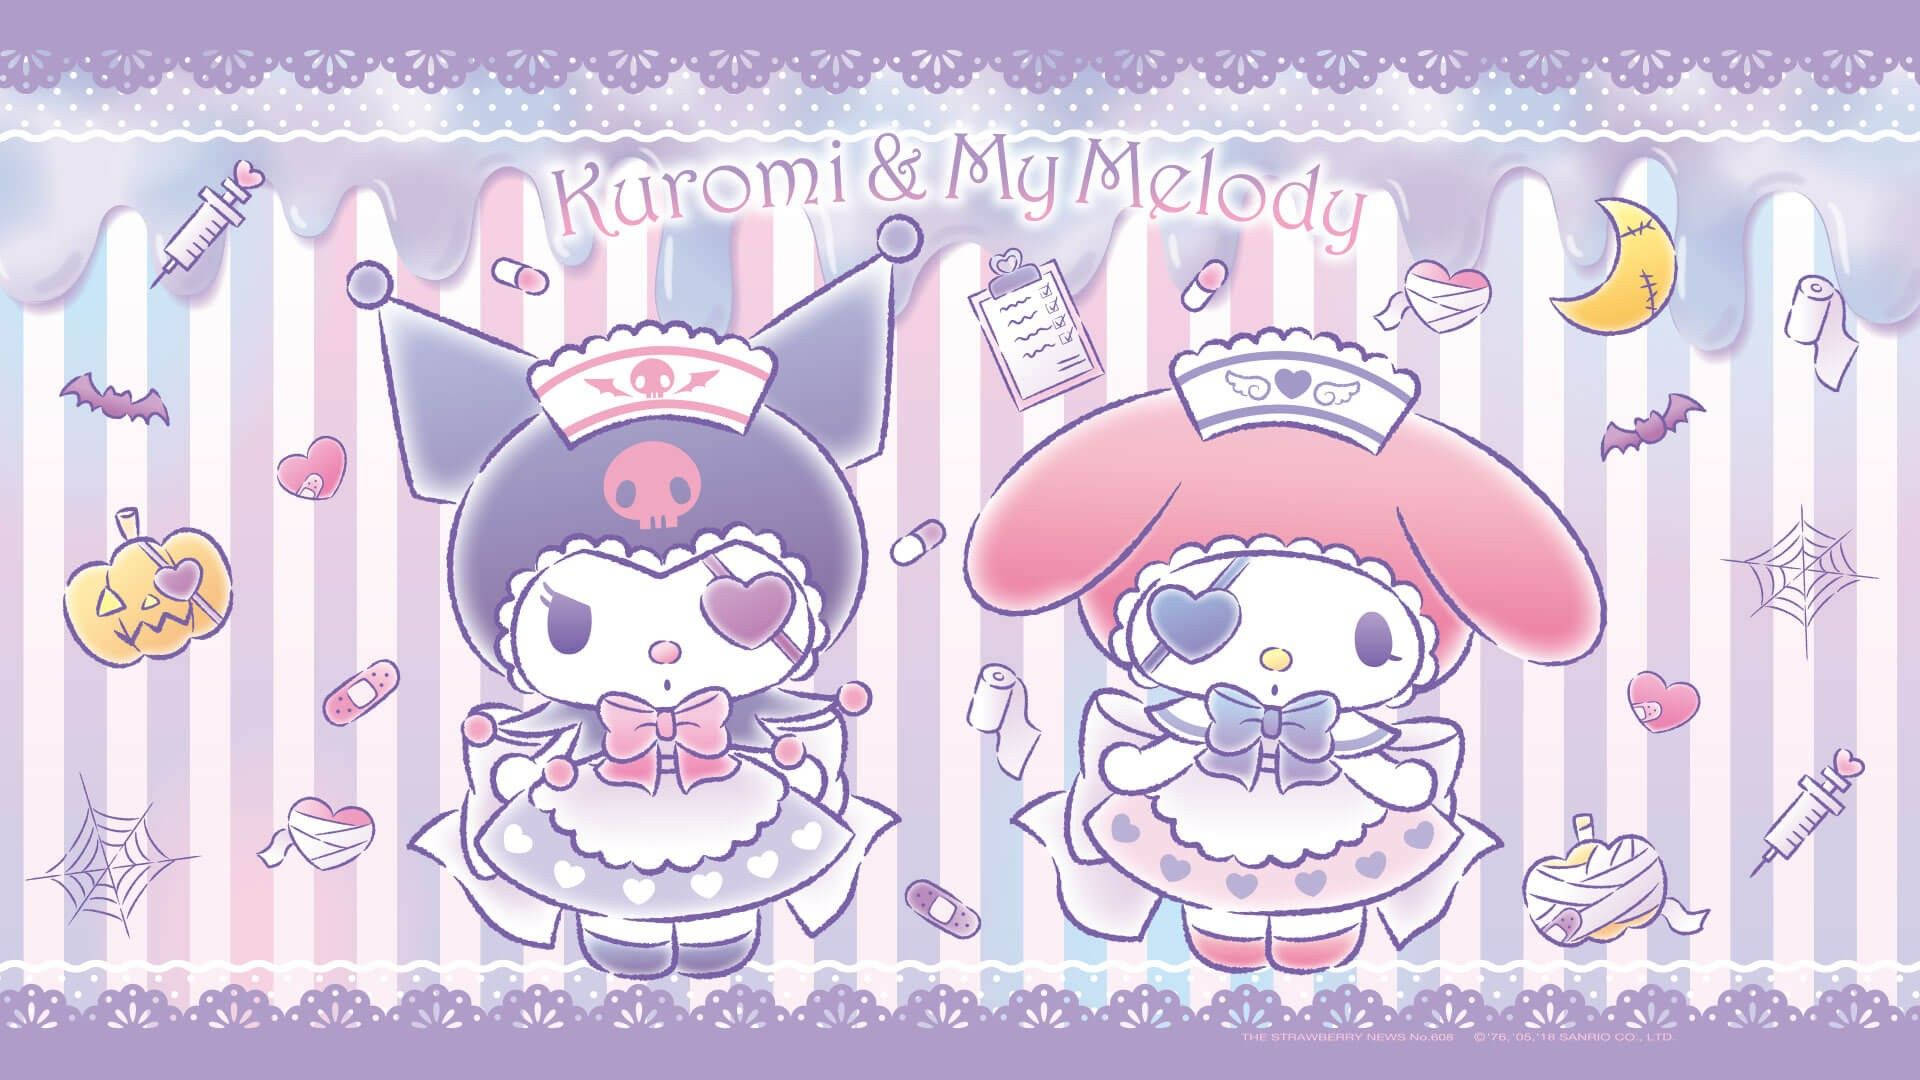 Download Halloween Themed Kuromi And Melody Wallpaper